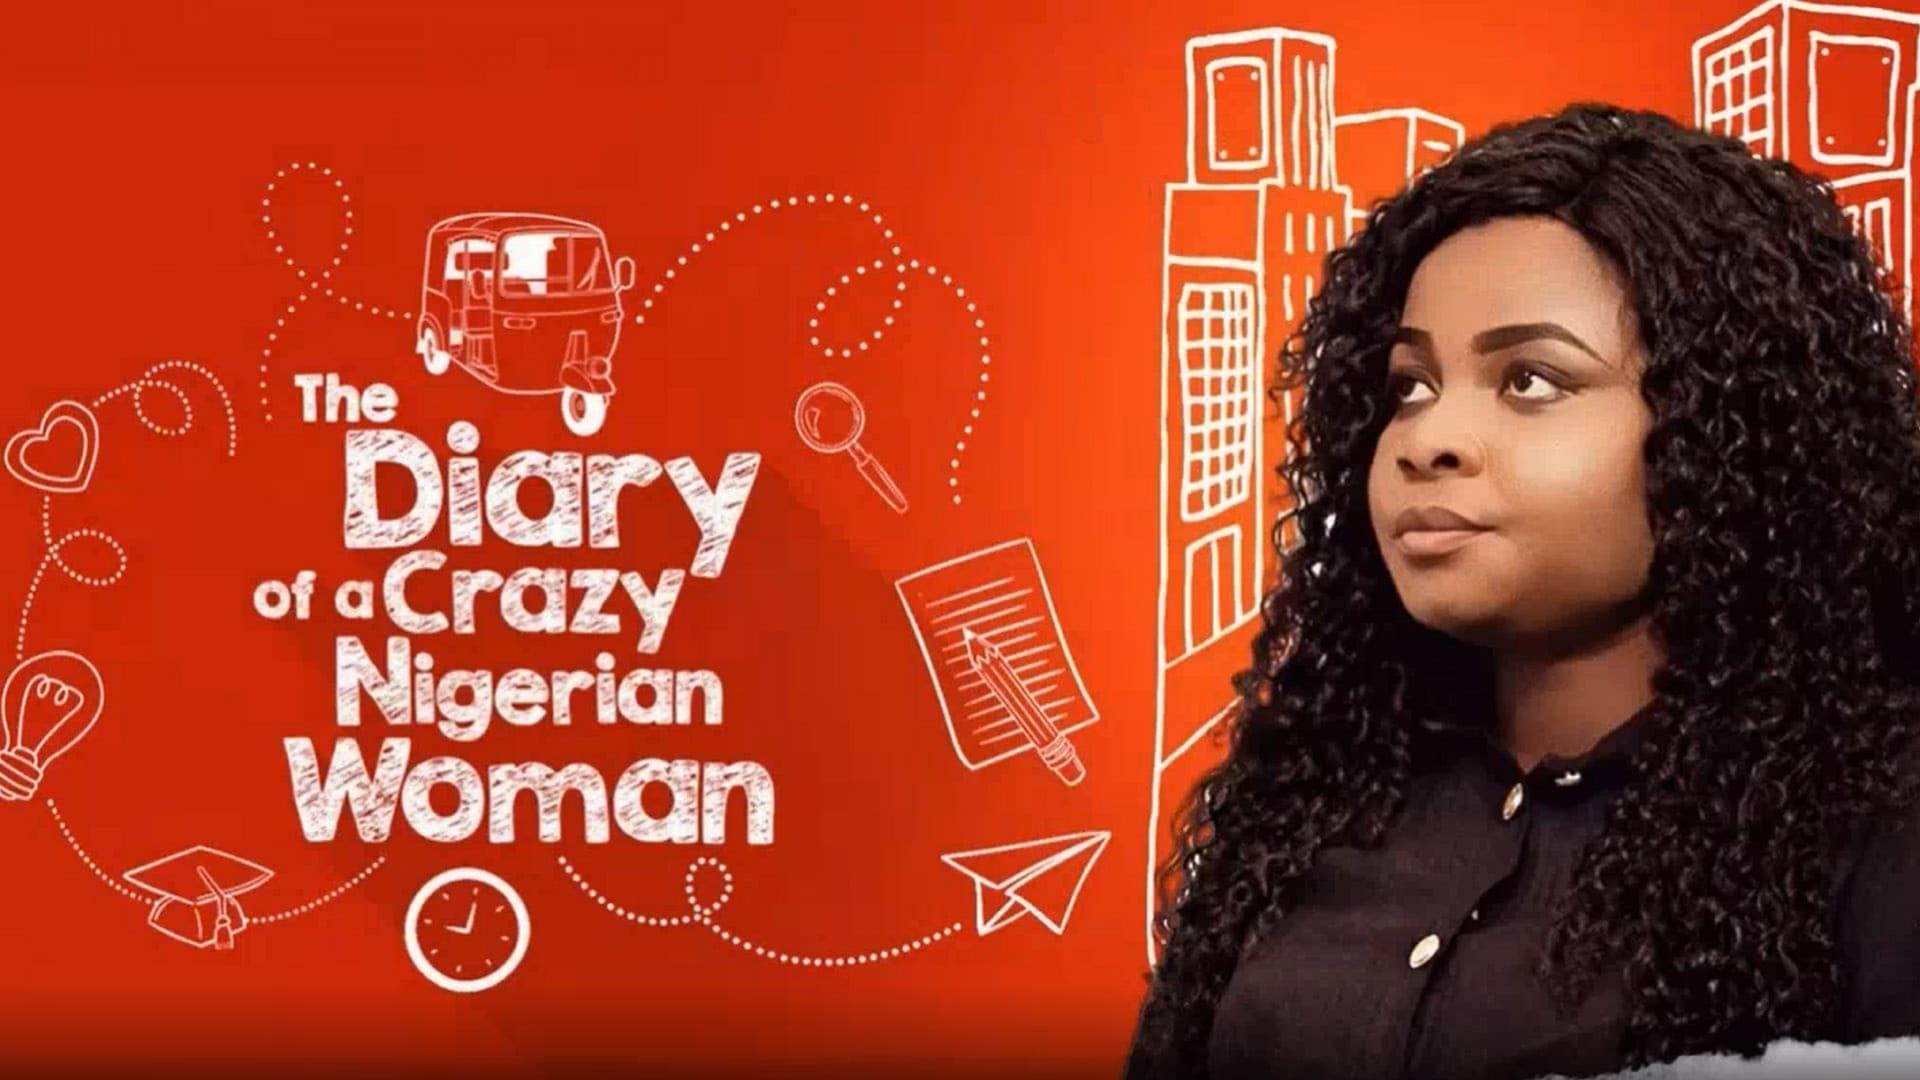 The Diary of A Crazy Nigerian Woman backdrop